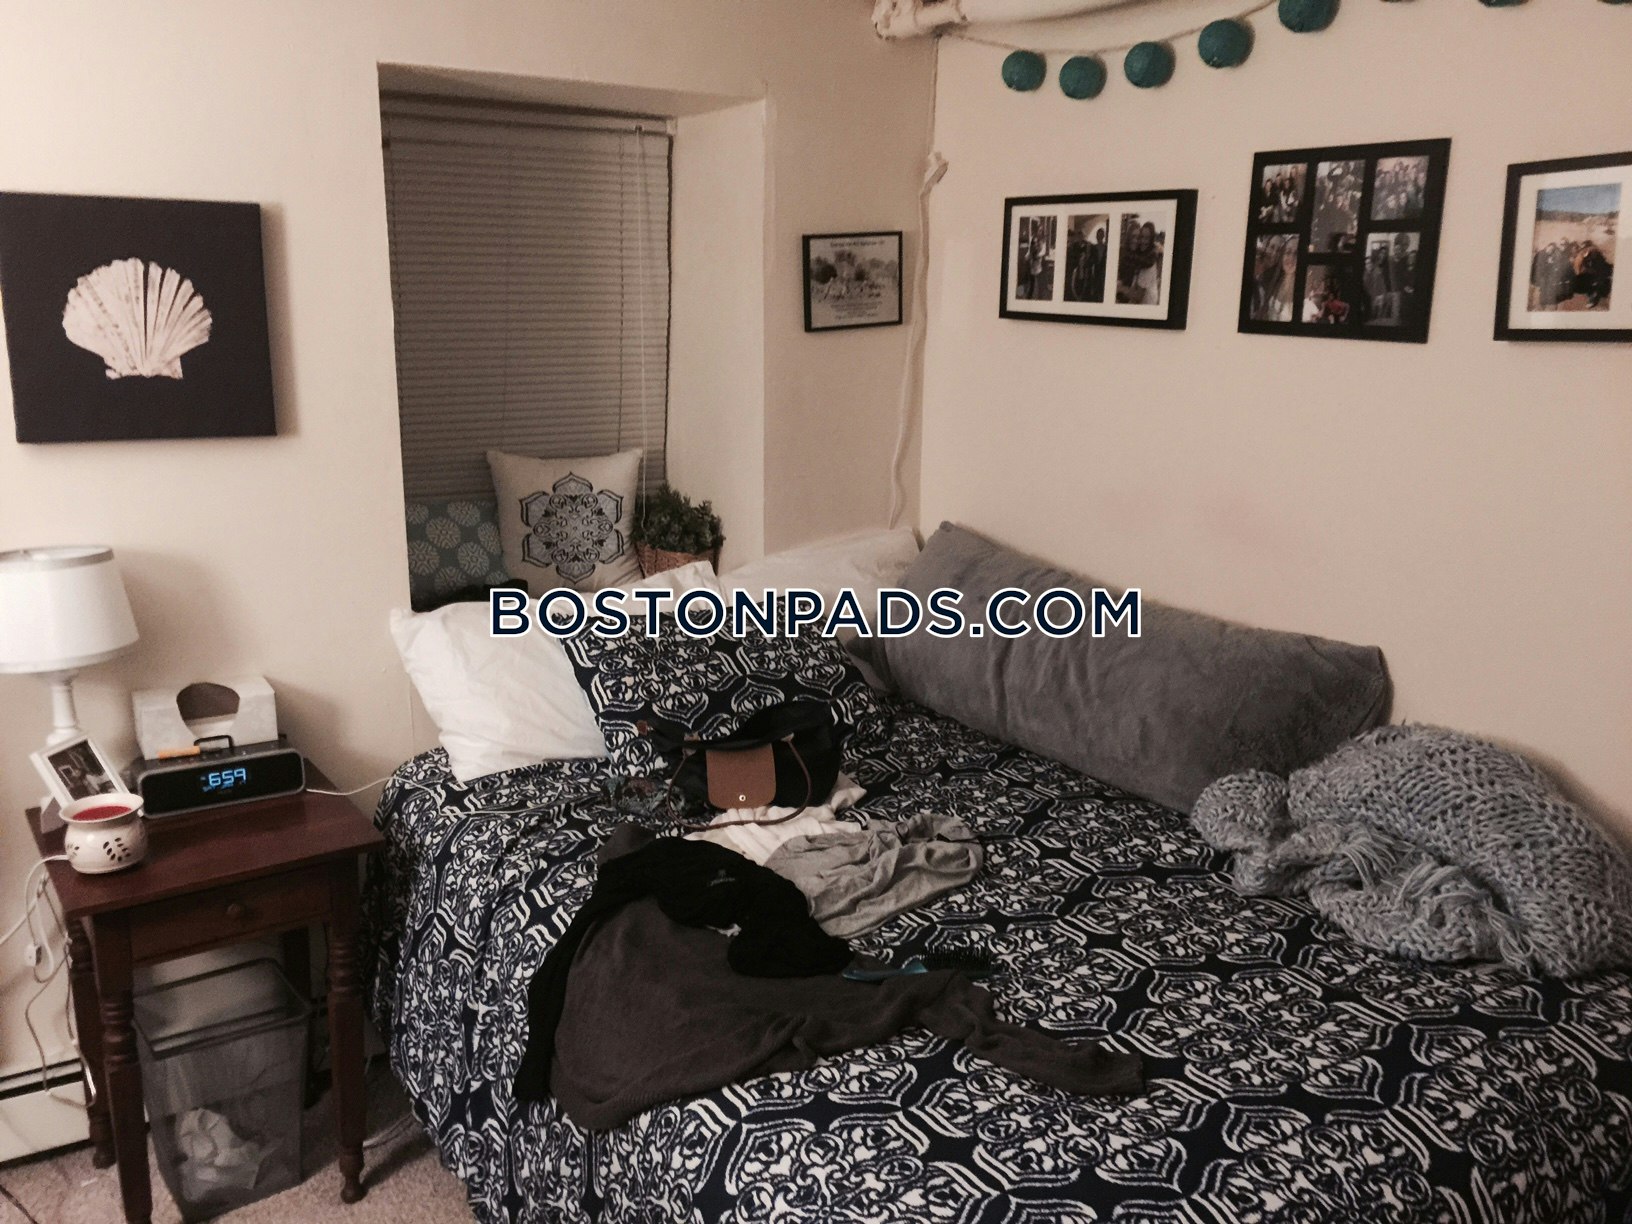 Northeastern Symphony Apartment For Rent 4 Bedrooms 2 Baths Boston 5 800